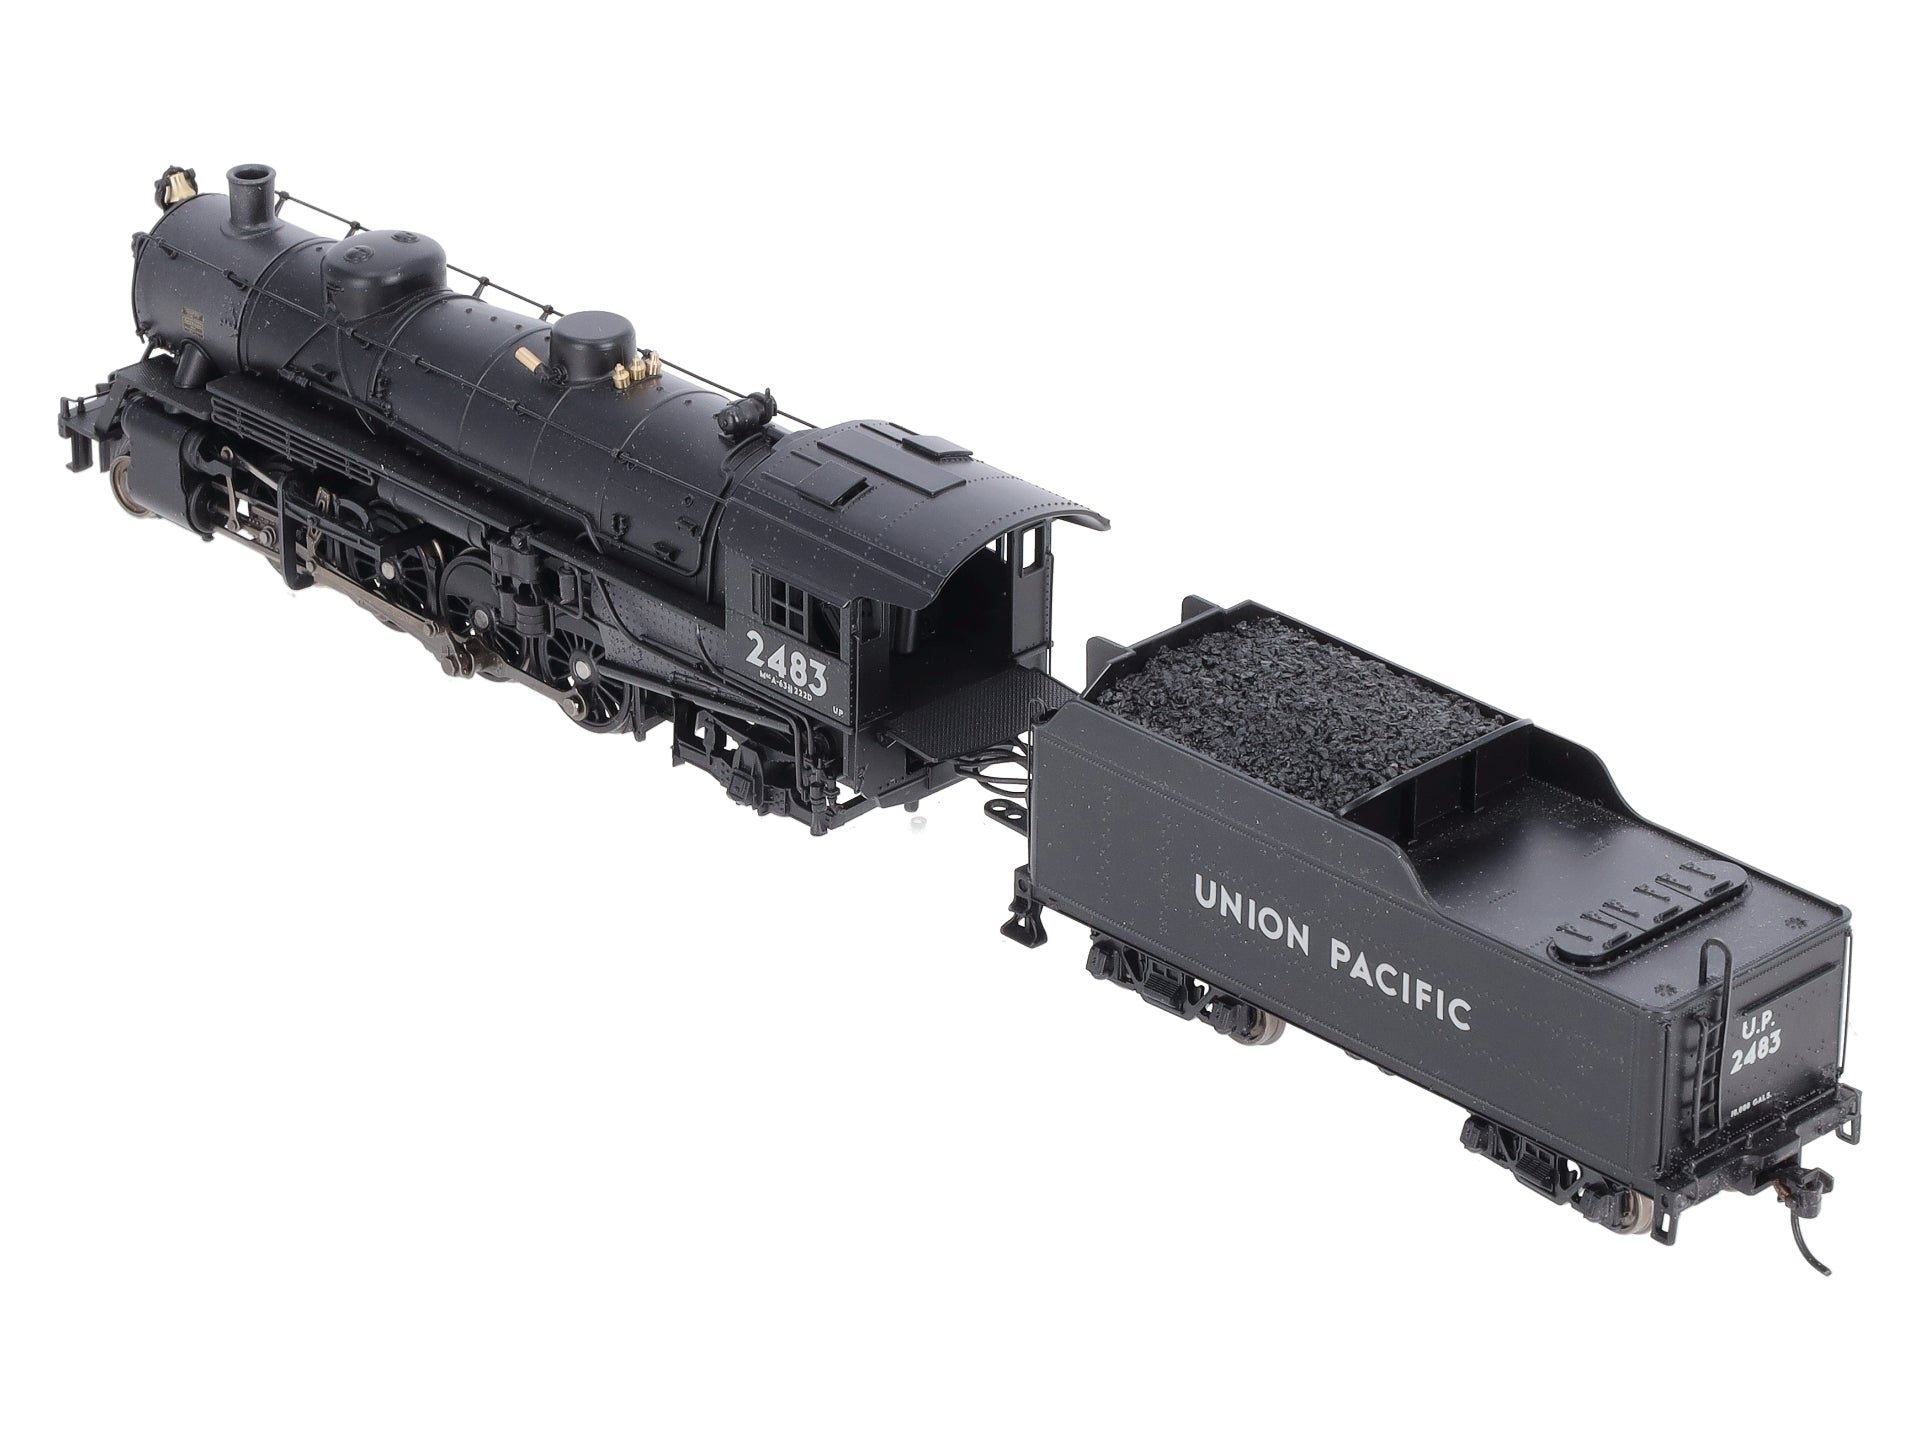 Broadway Limited 5579 HO Union Pacific P3 2-8-2 Lt Mikado with Sound & DCC #2483